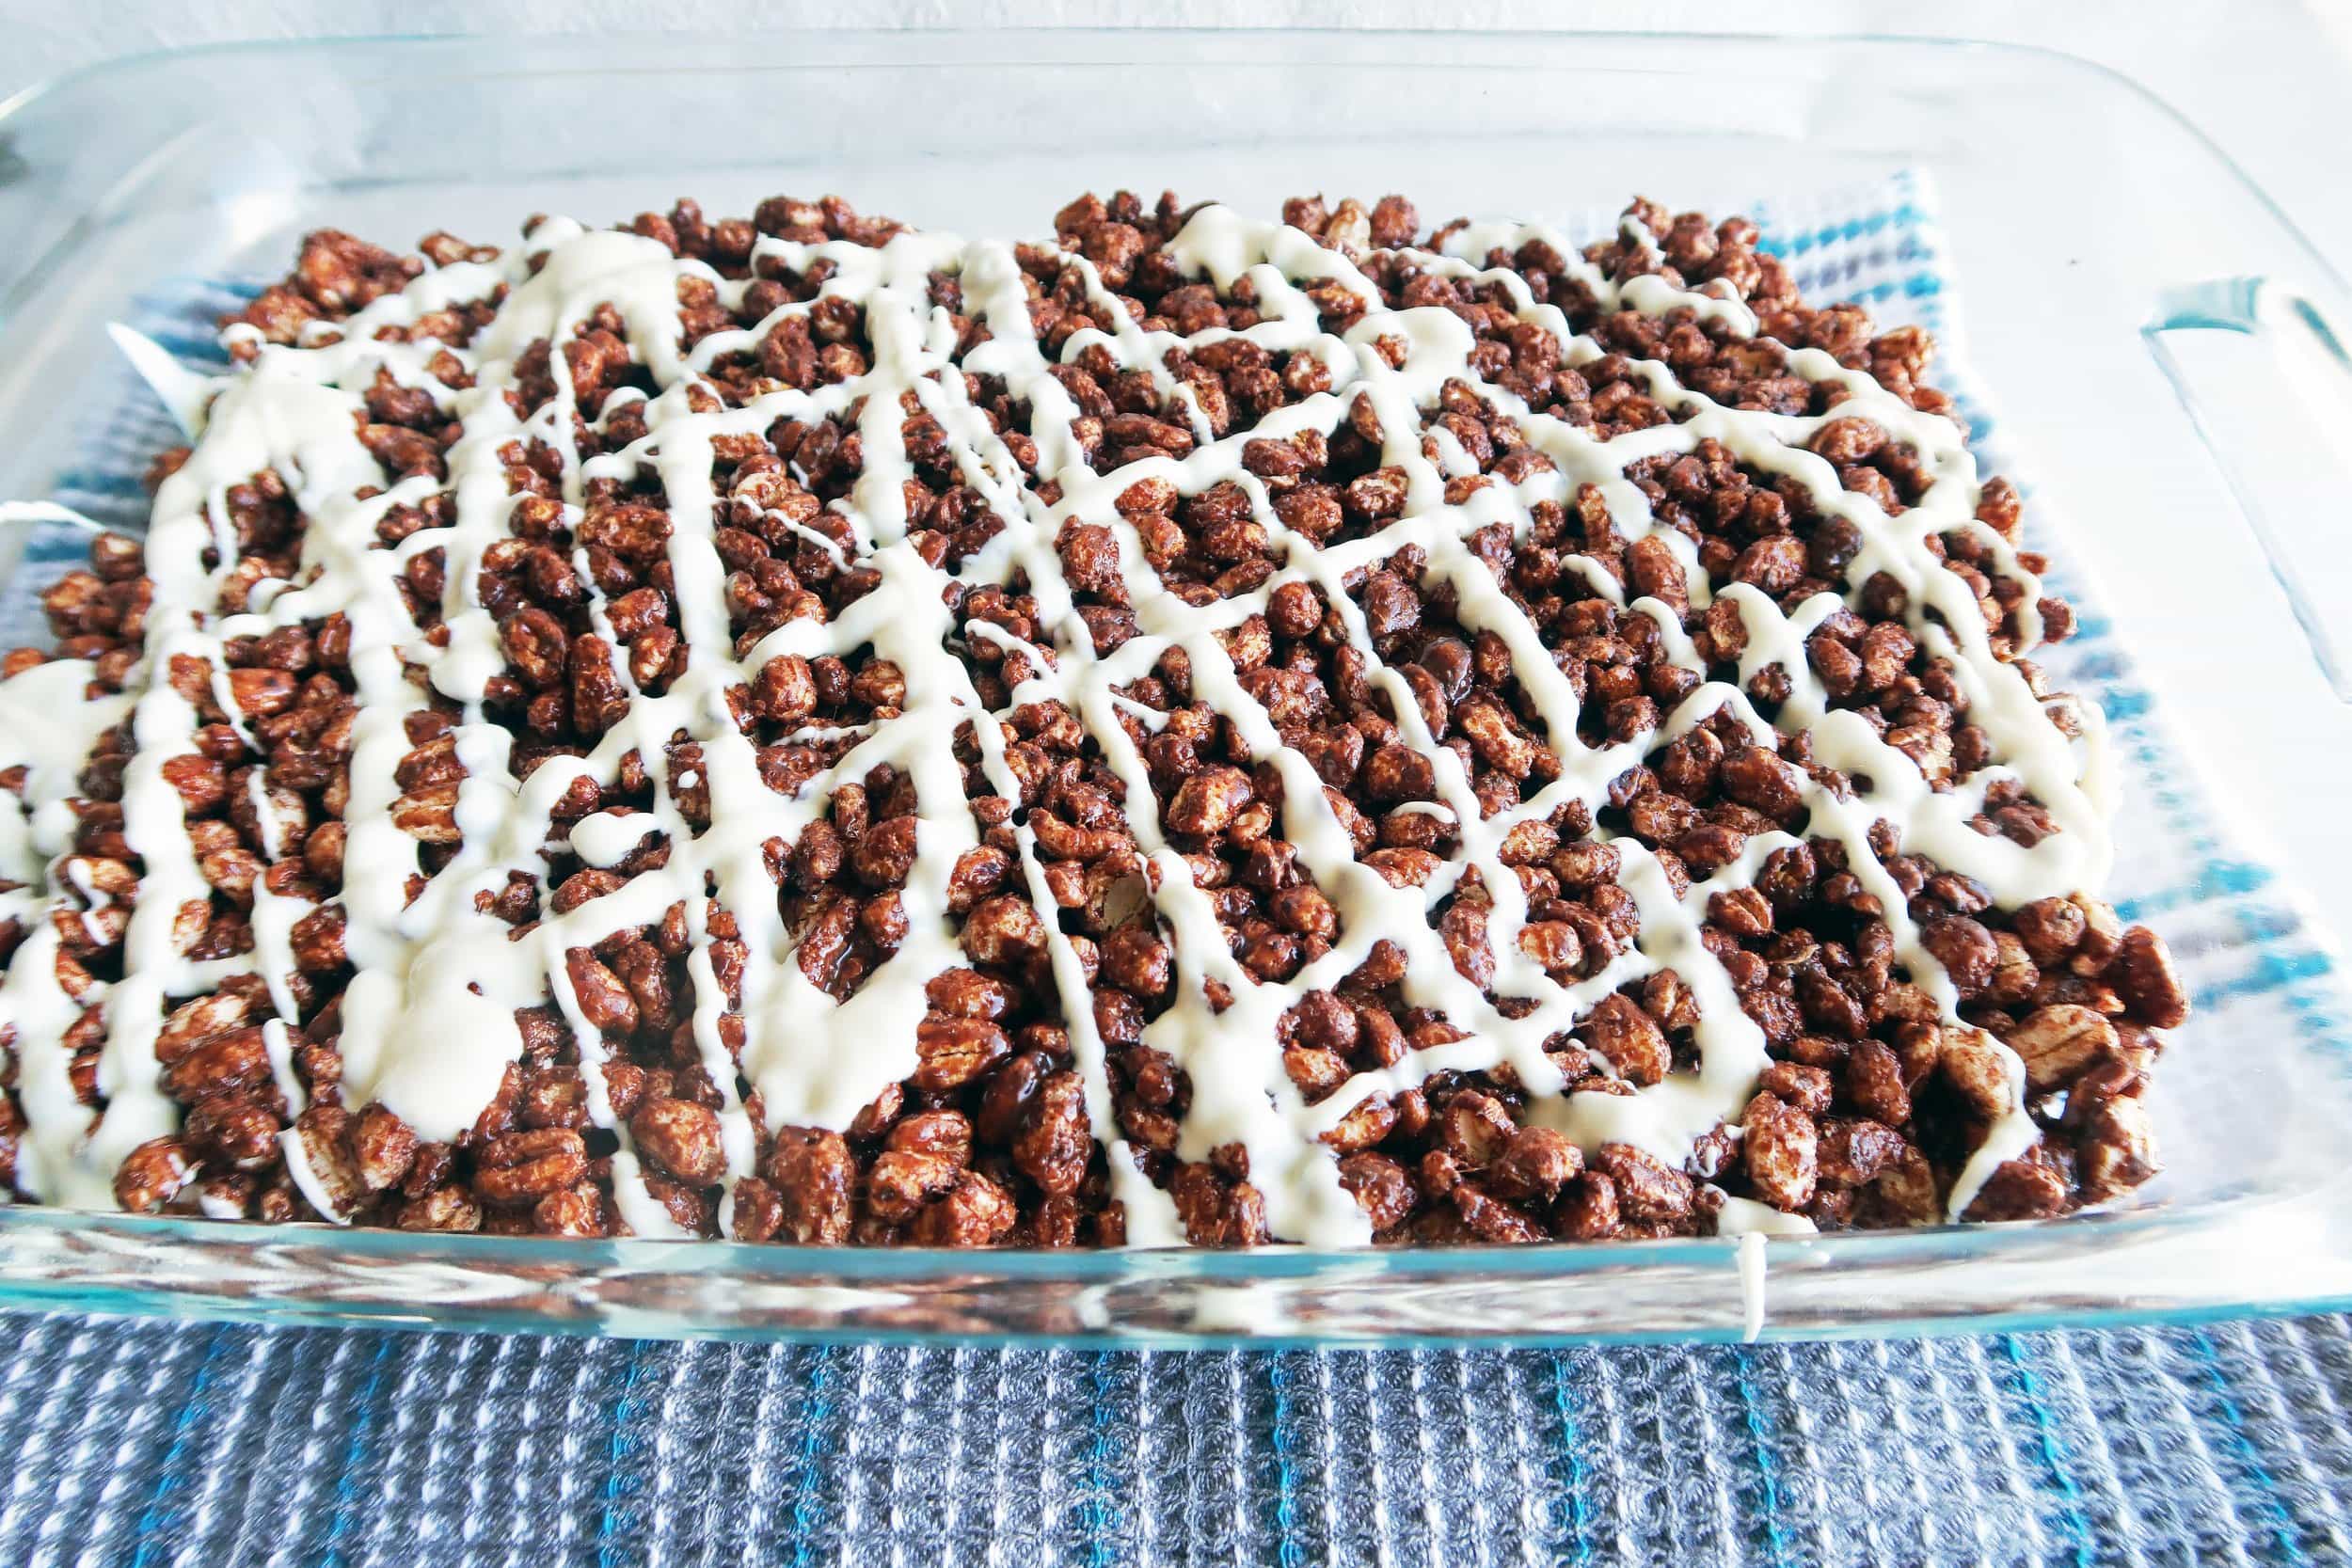 Chocolate Marshmallow Puffed Wheat Squares with white chocolate drizzle in a large glass baking dish.